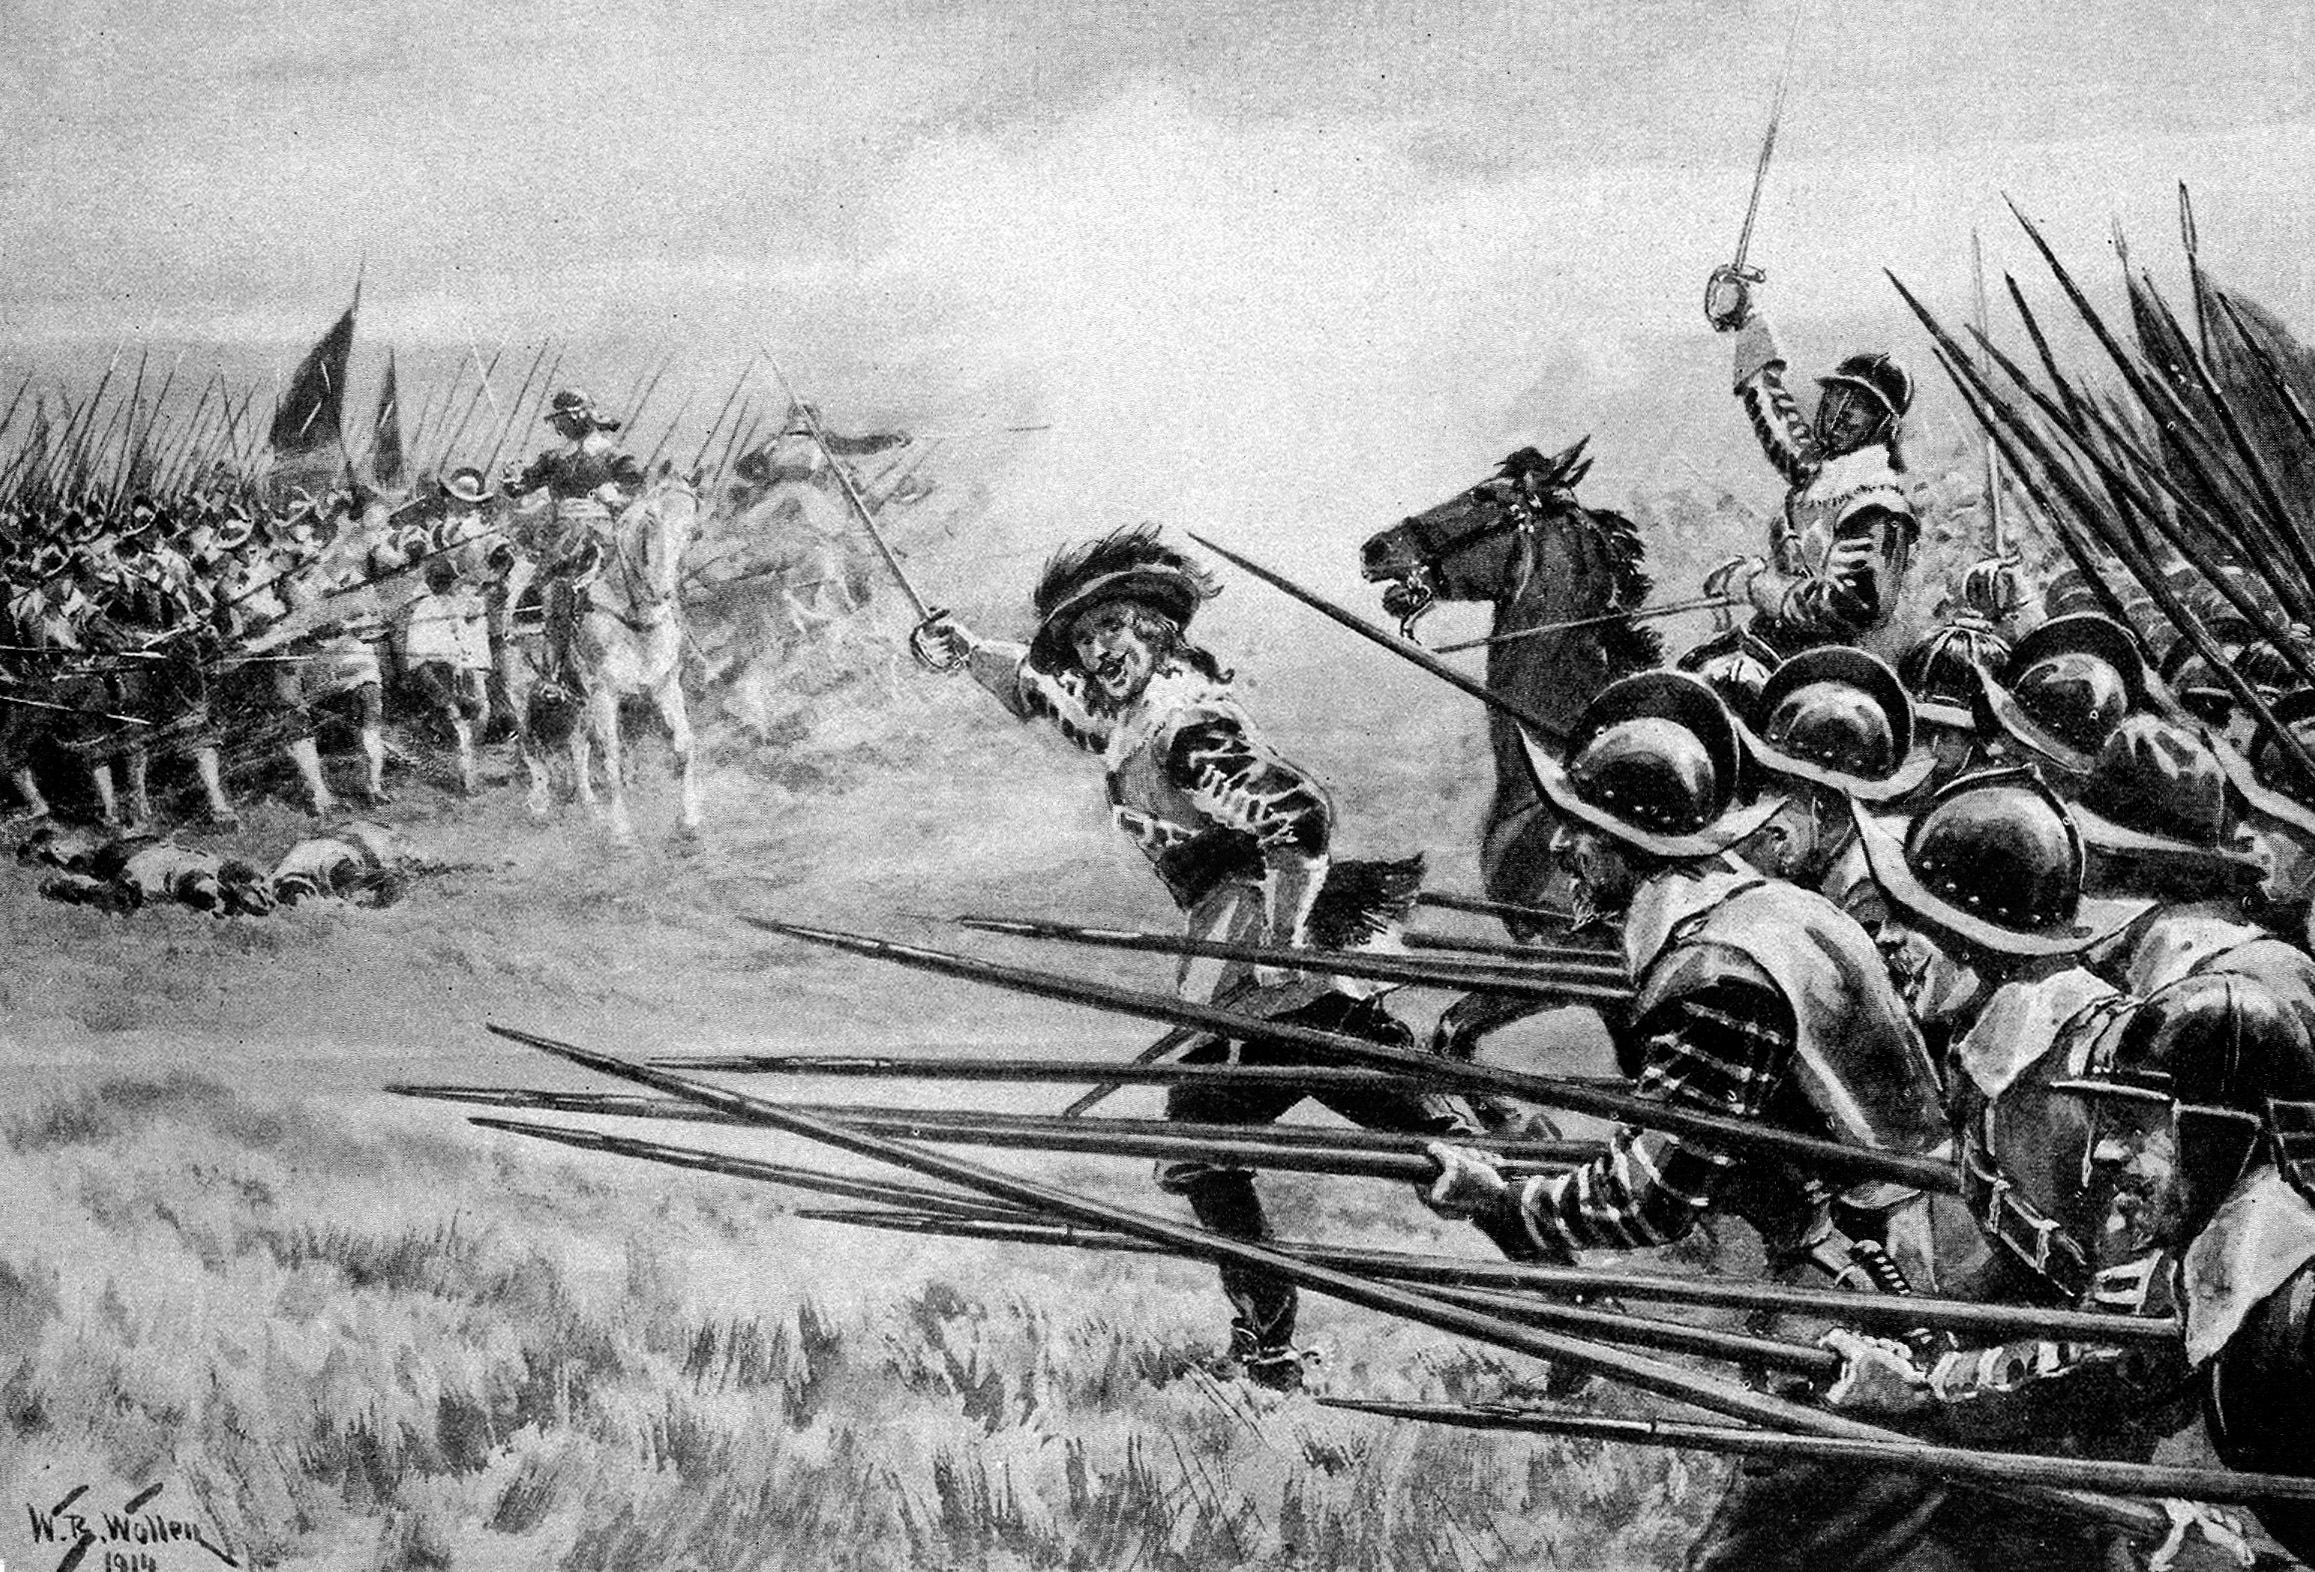 Royalist infantrymen, flourishing pikes, charge fiercely towards the New Model Army to open the Battle of Naseby.